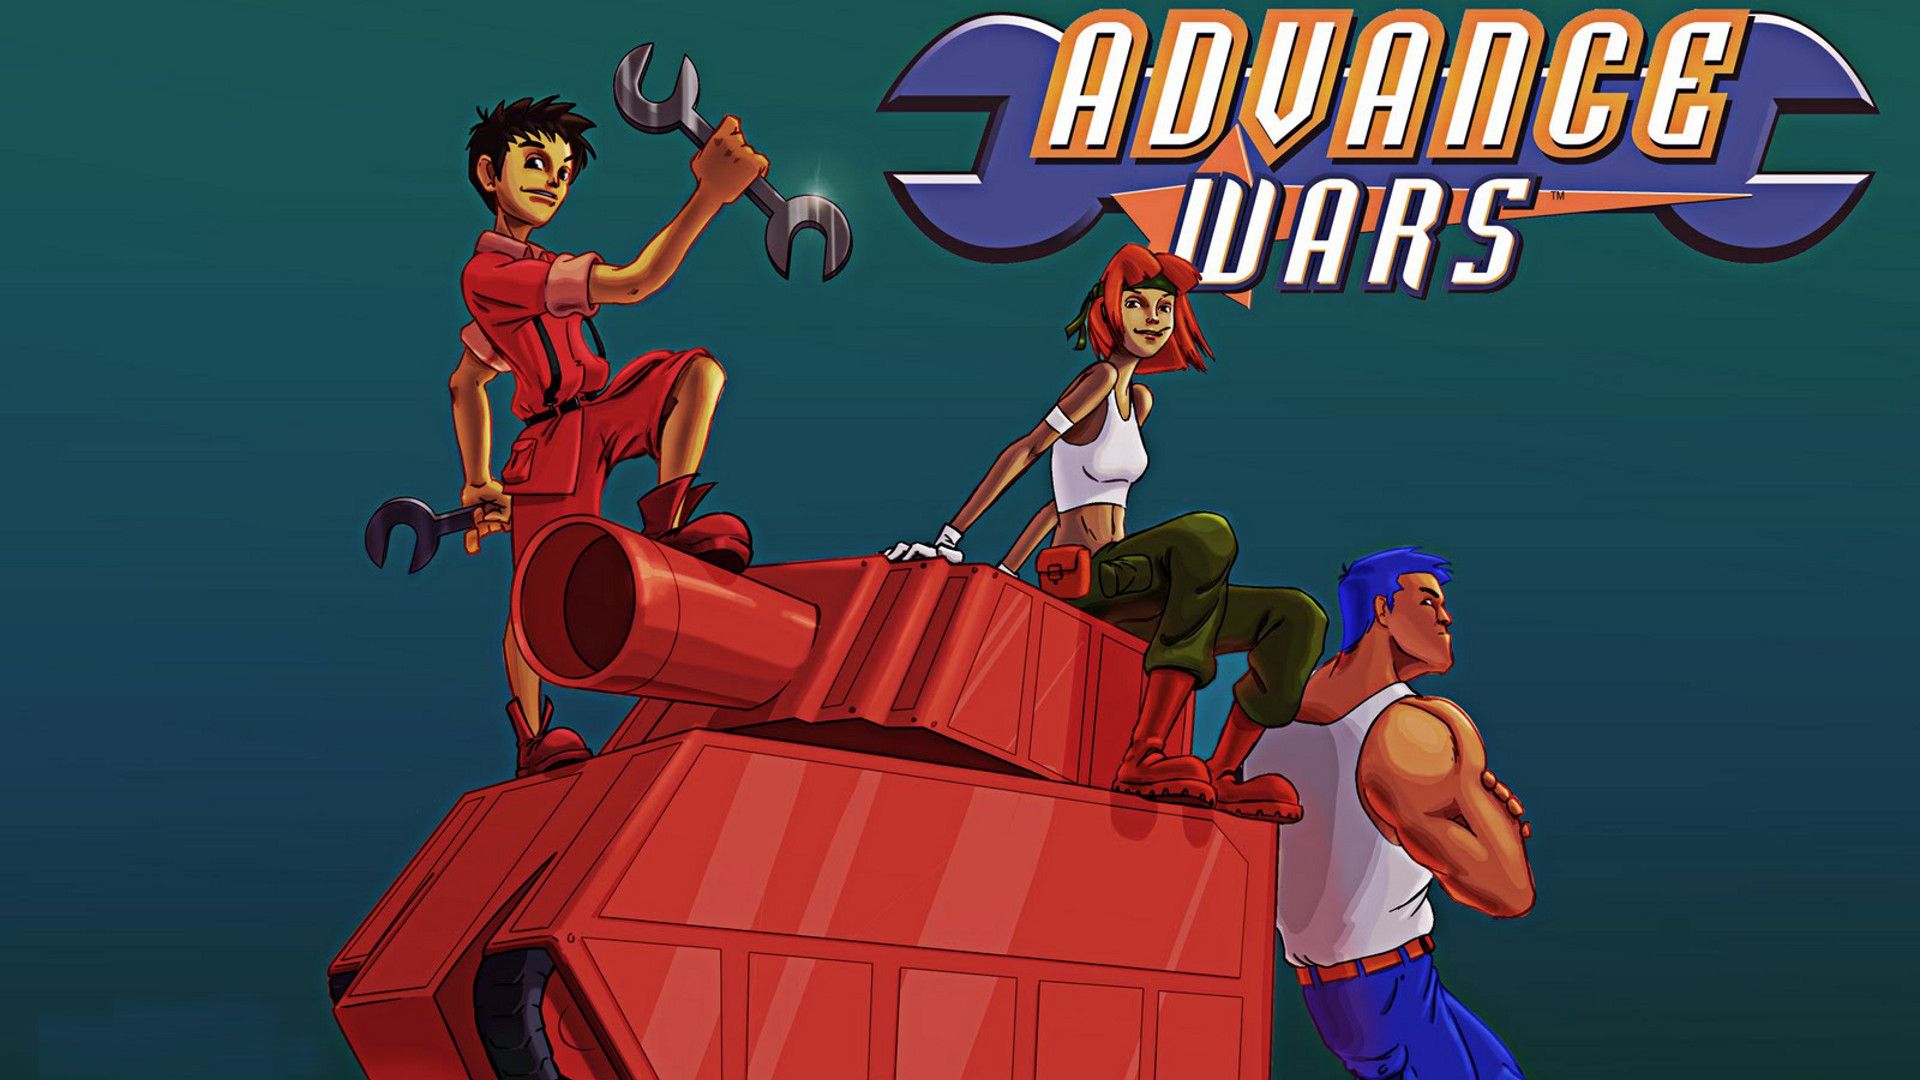 Video Game Advance Wars HD Wallpaper | Background Image